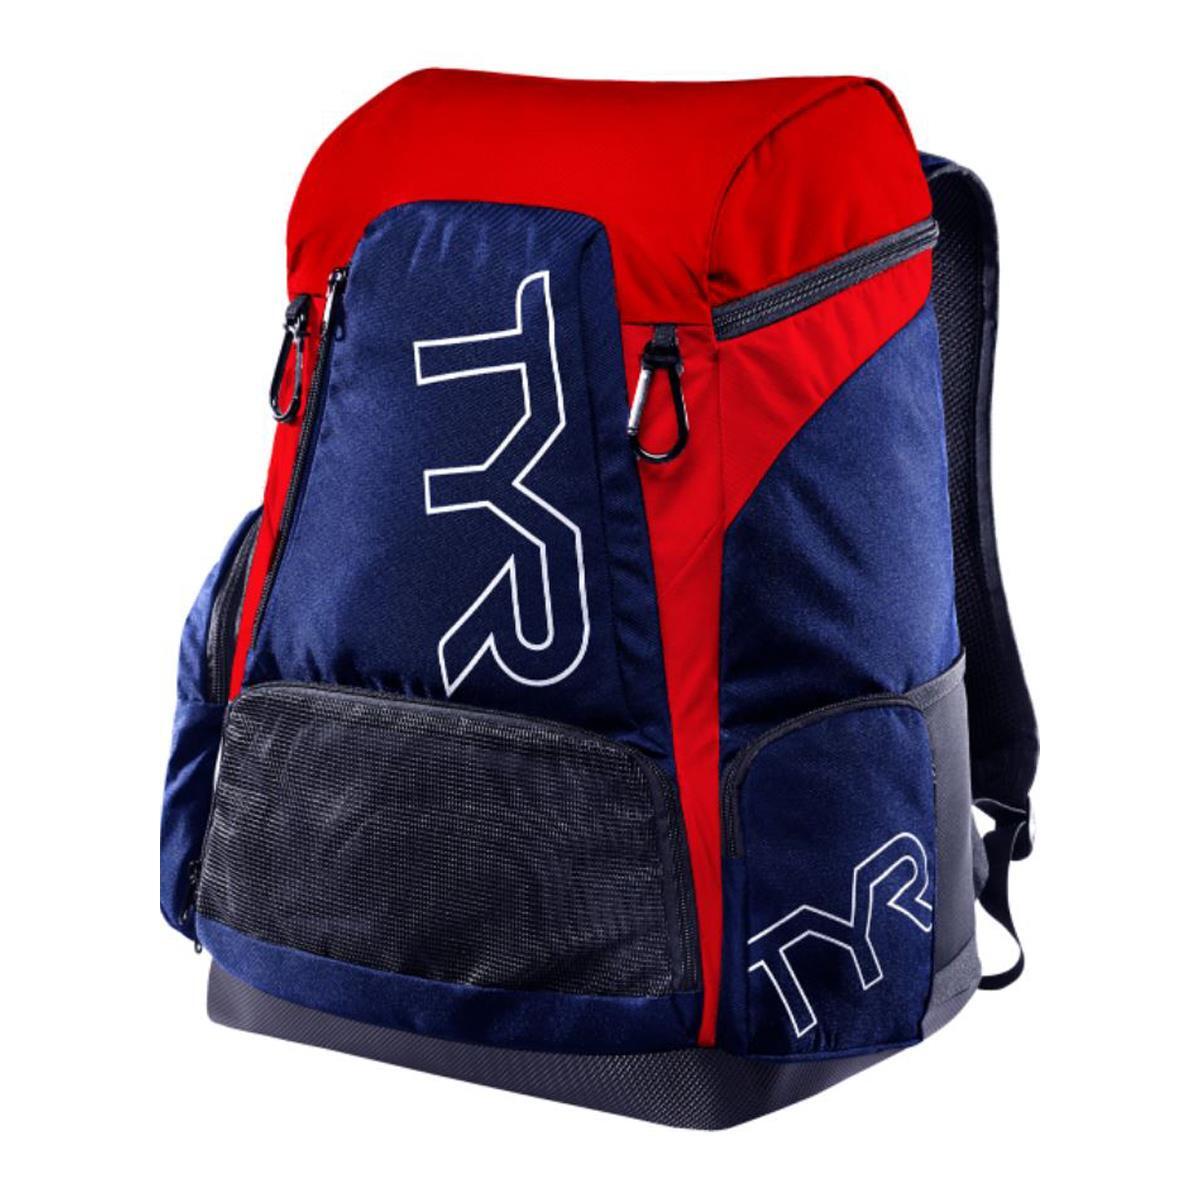 TYR TYR Alliance Backpack - Navy Blue /Red